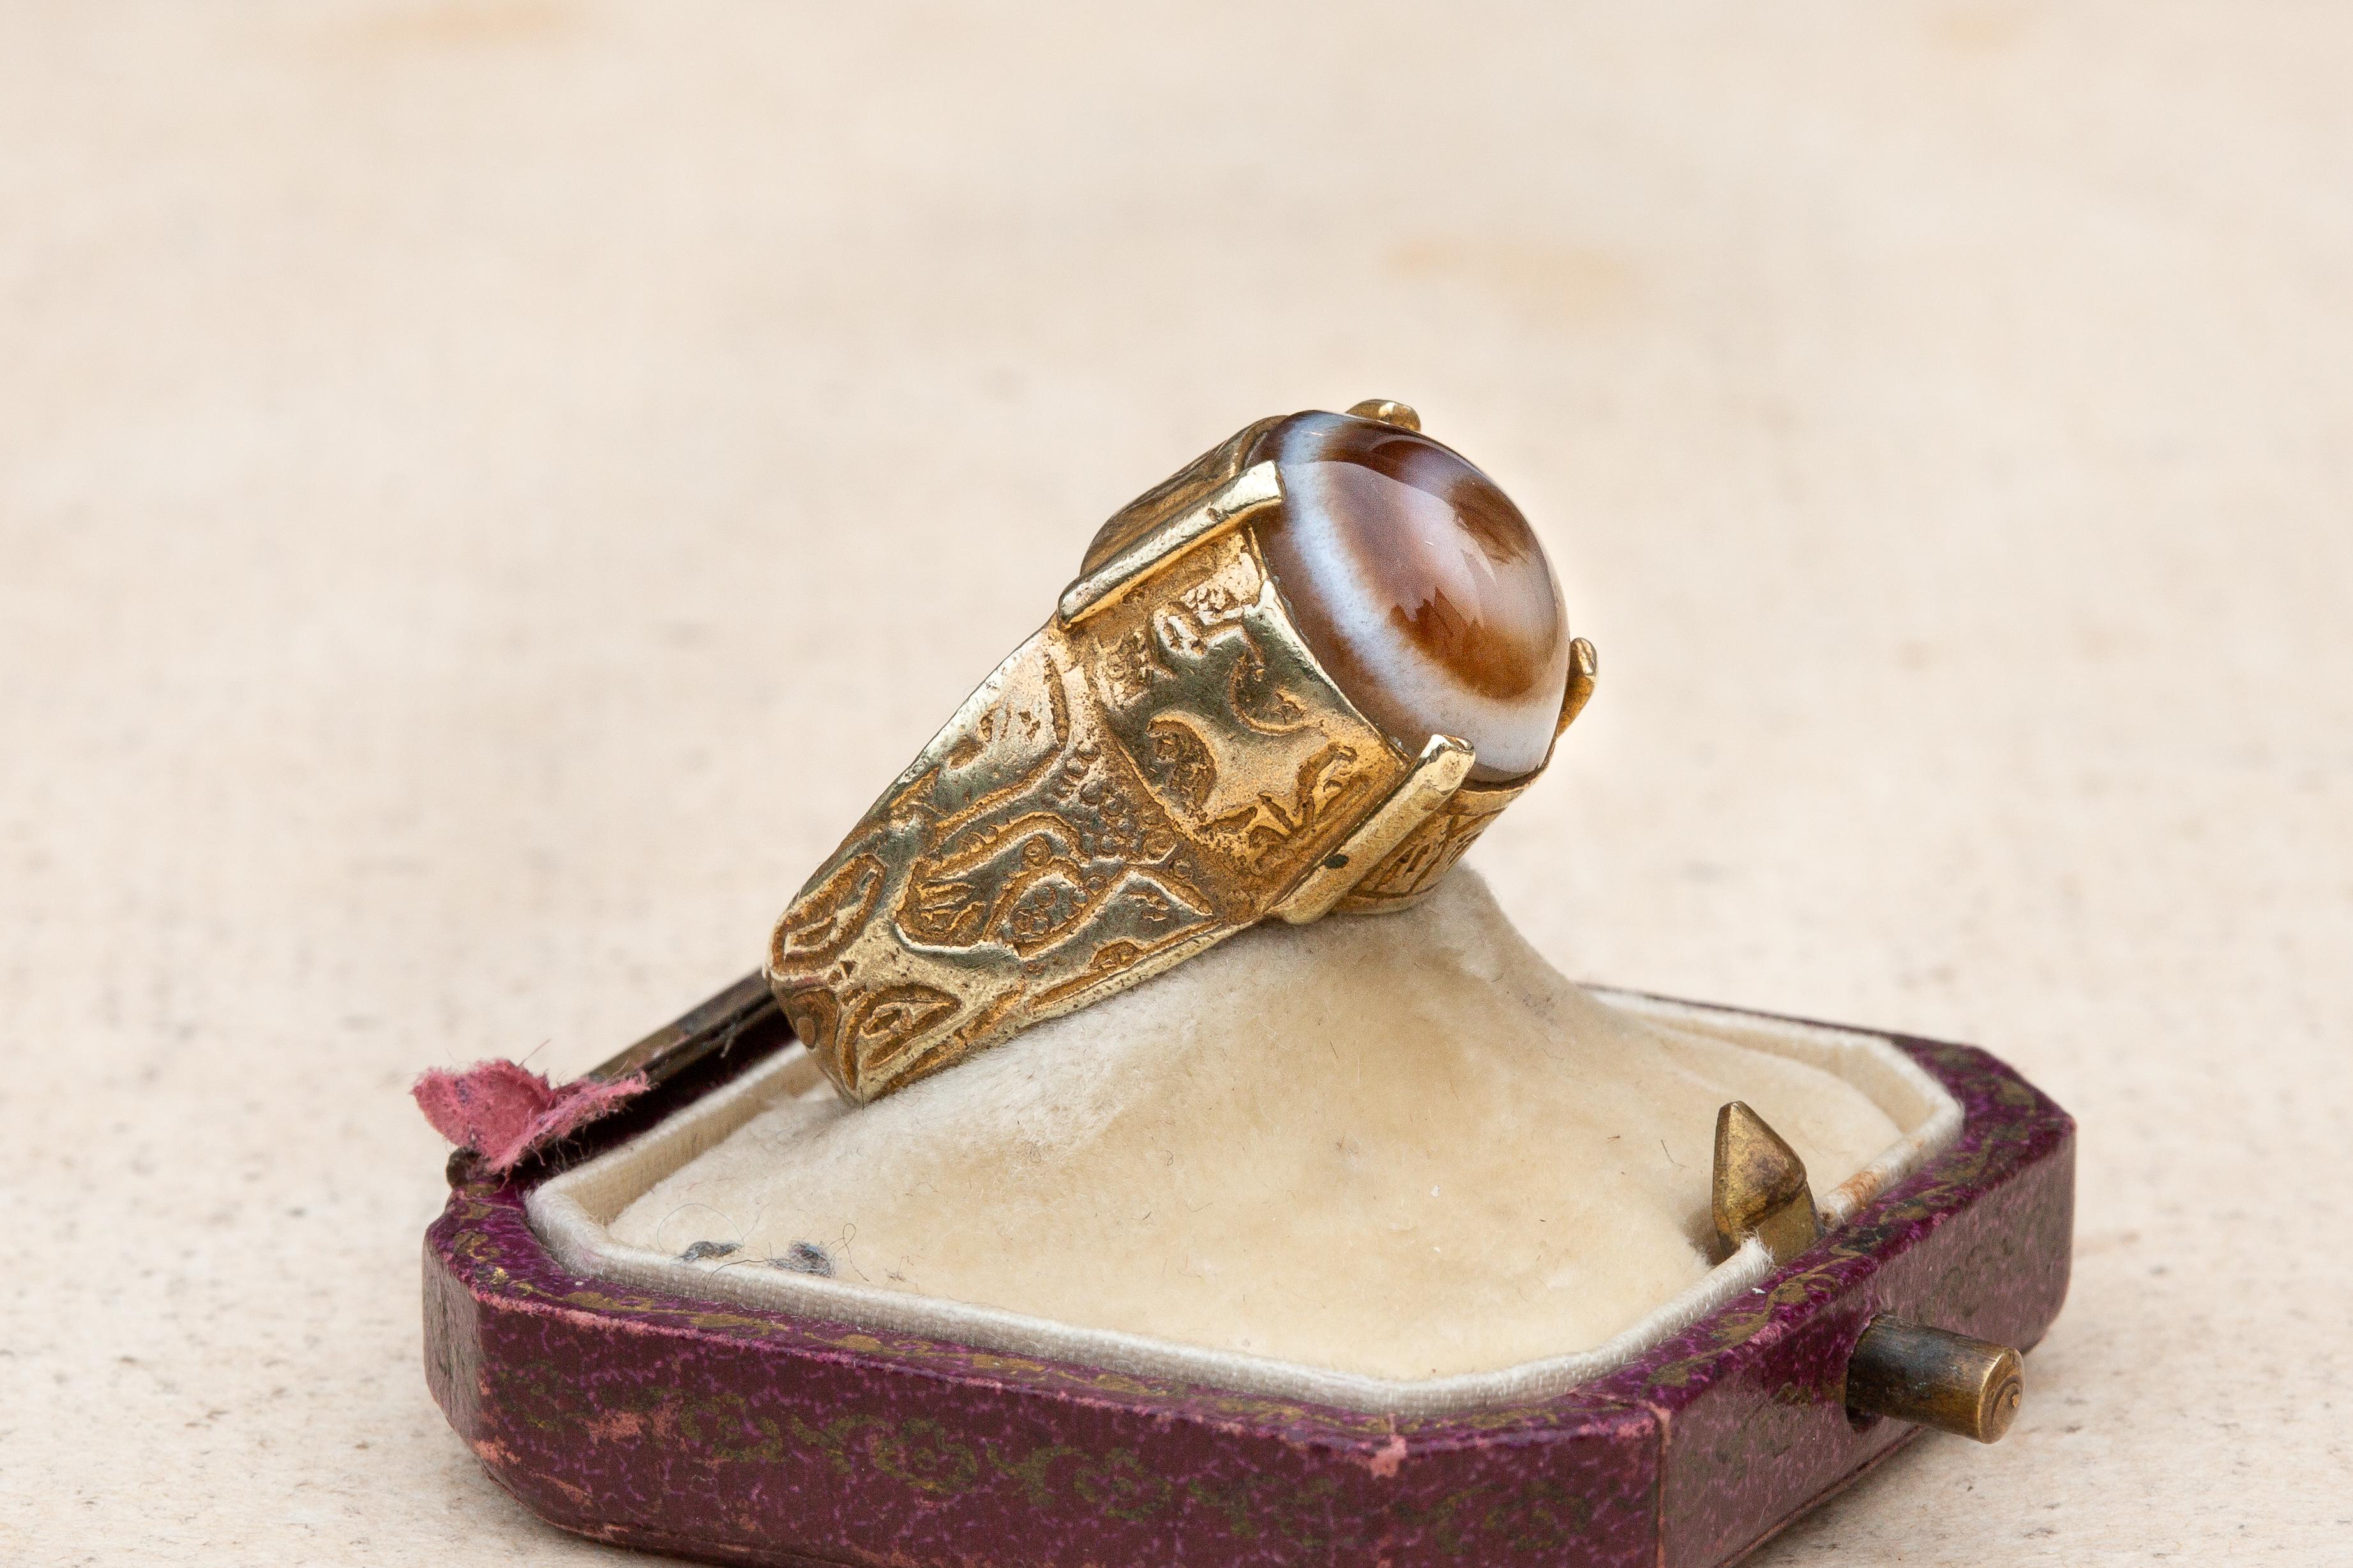 Scarce 13th-14th Century Islamic Late Seljuk Empire Gold and Eye Agate Ring For Sale 4